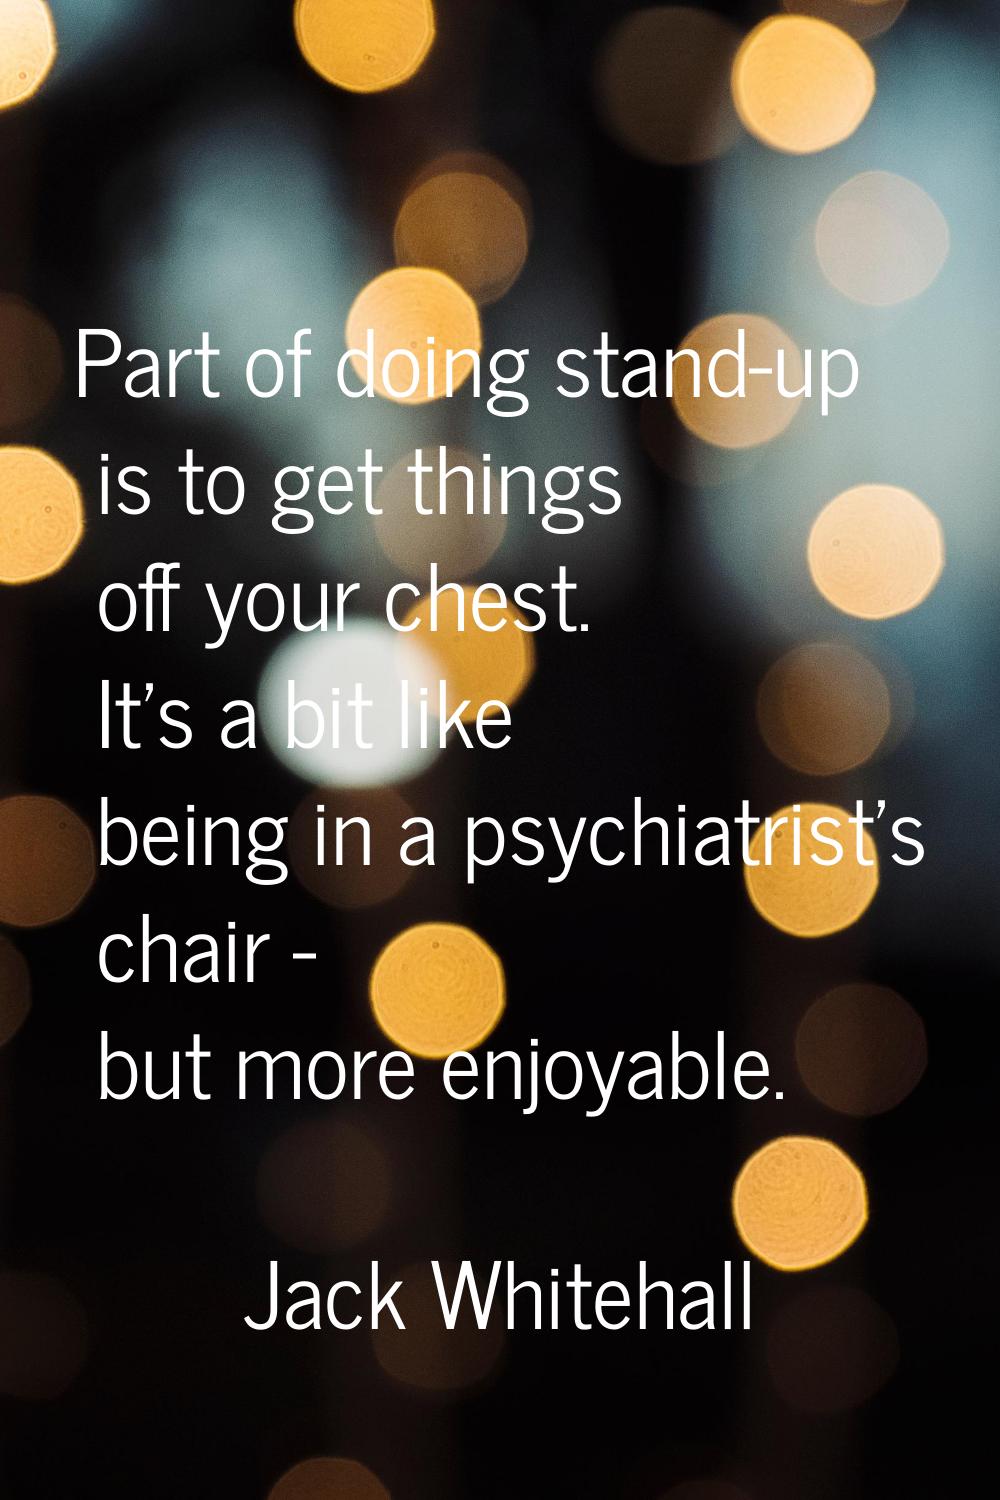 Part of doing stand-up is to get things off your chest. It's a bit like being in a psychiatrist's c